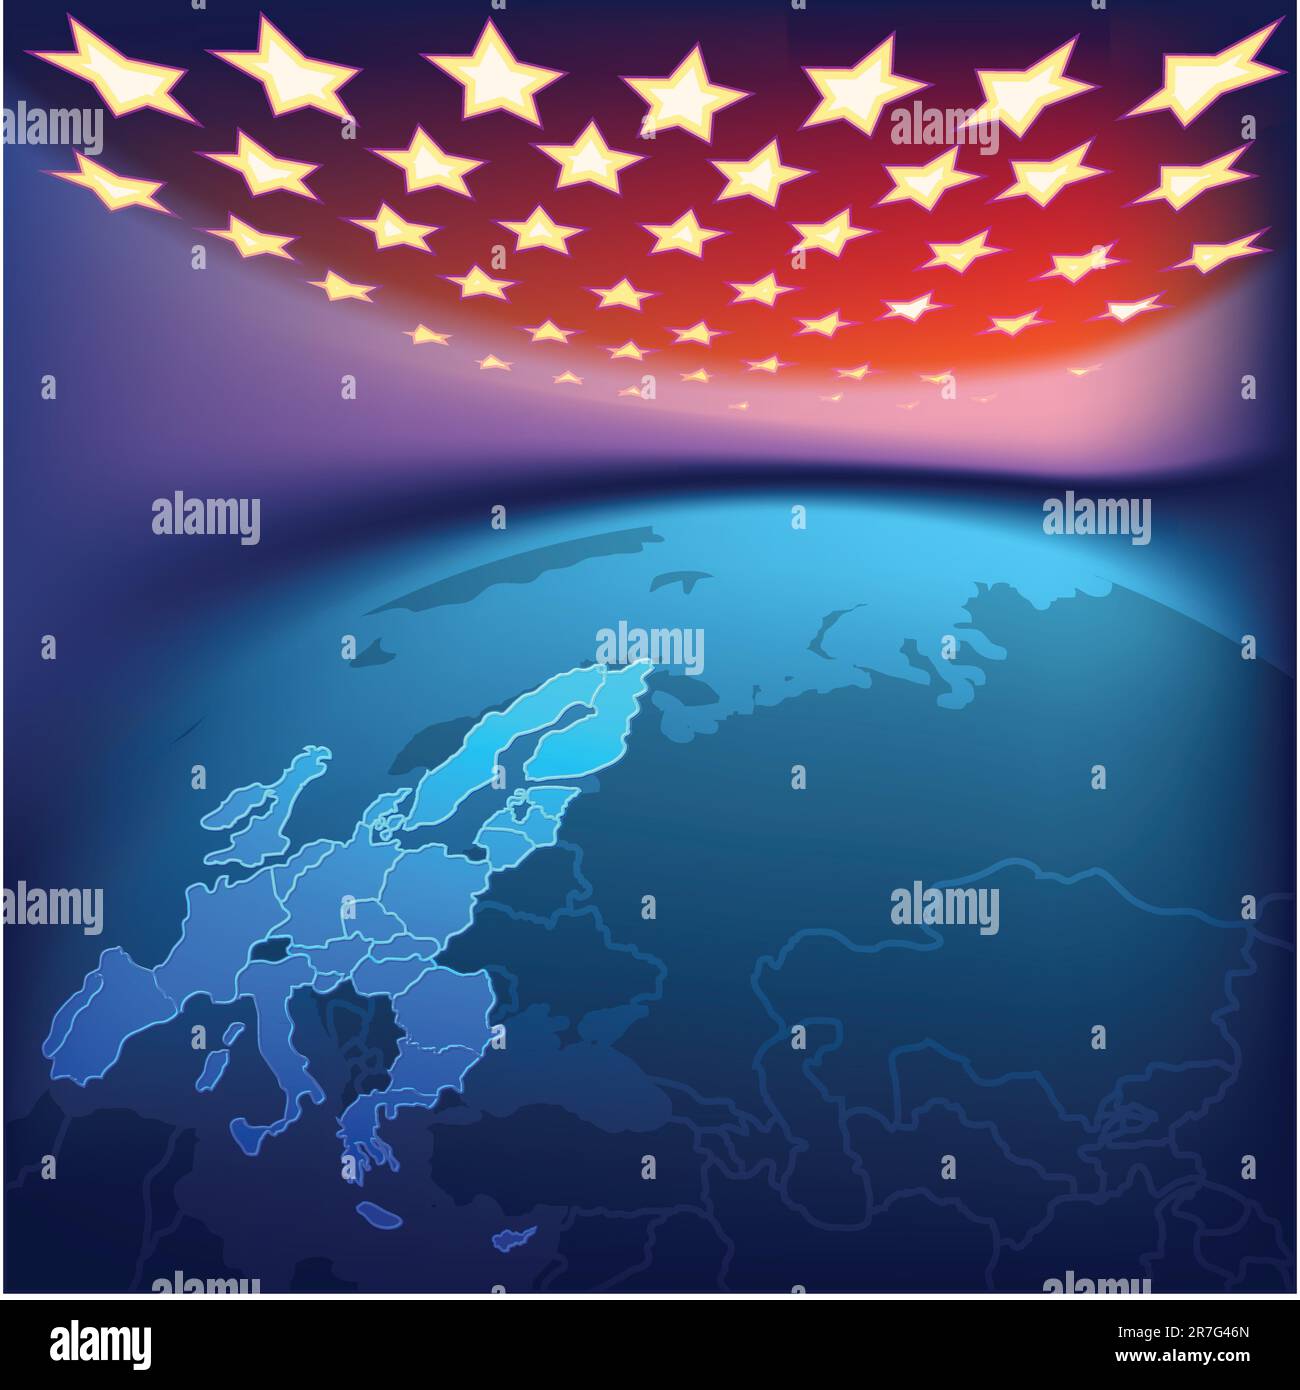 abstract background with europe map and stars Stock Vector